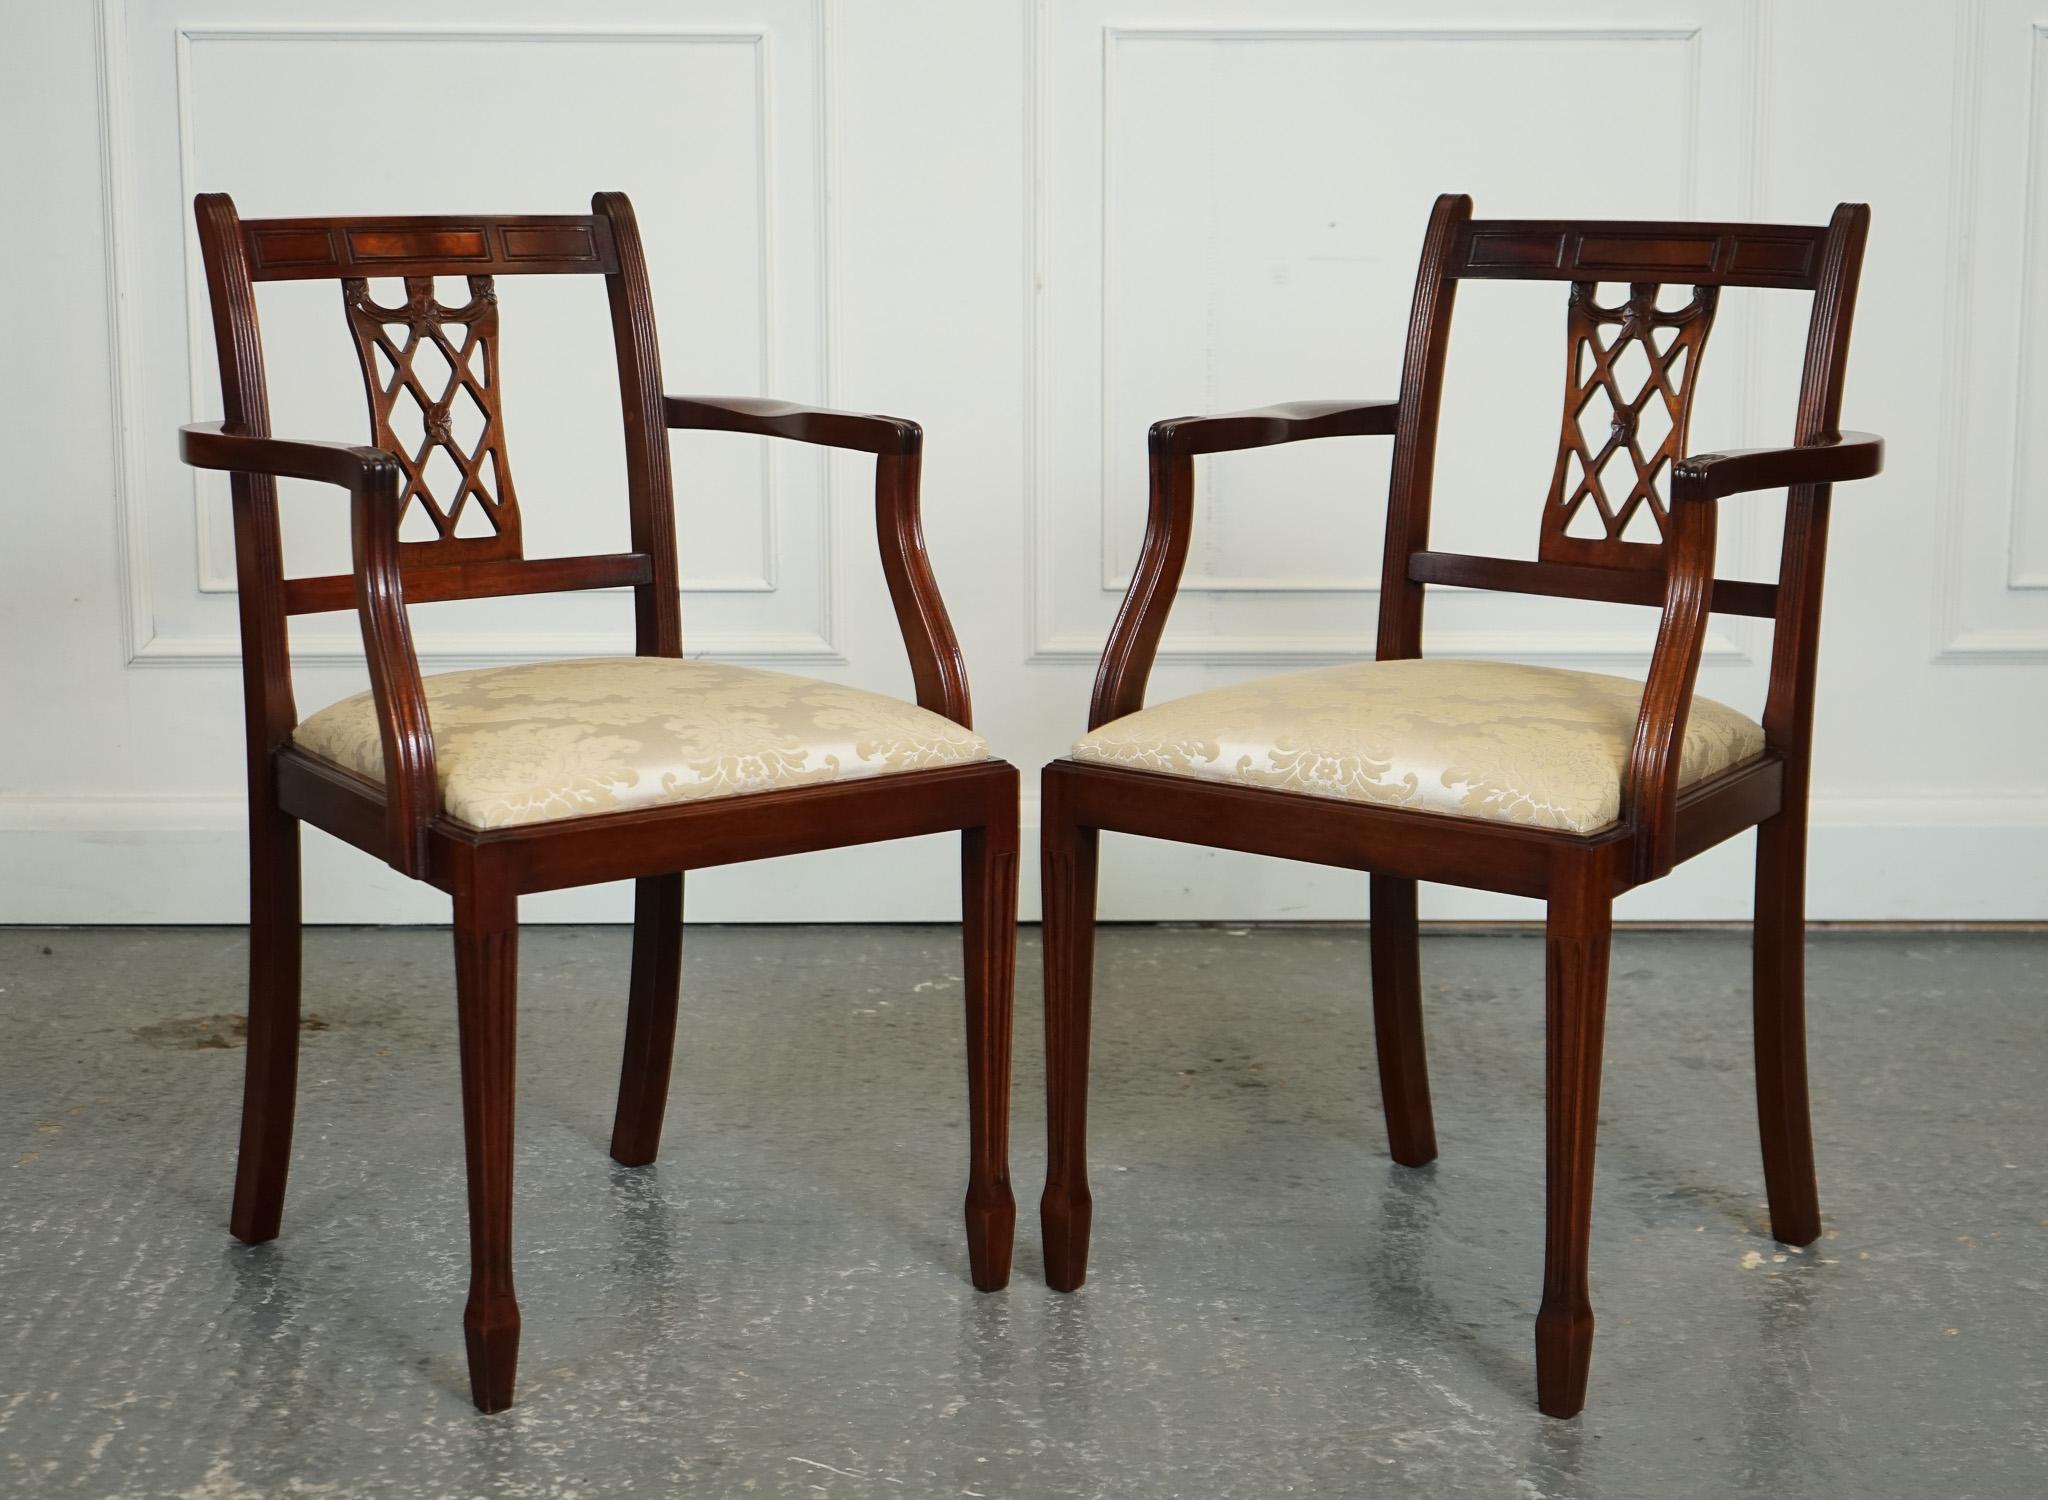 HEPPLEWHITE STYLE BEVAN FUNNELL SET OF 5 DINING CHAiRS CREAM UPHOLSTERED SEATS For Sale 2